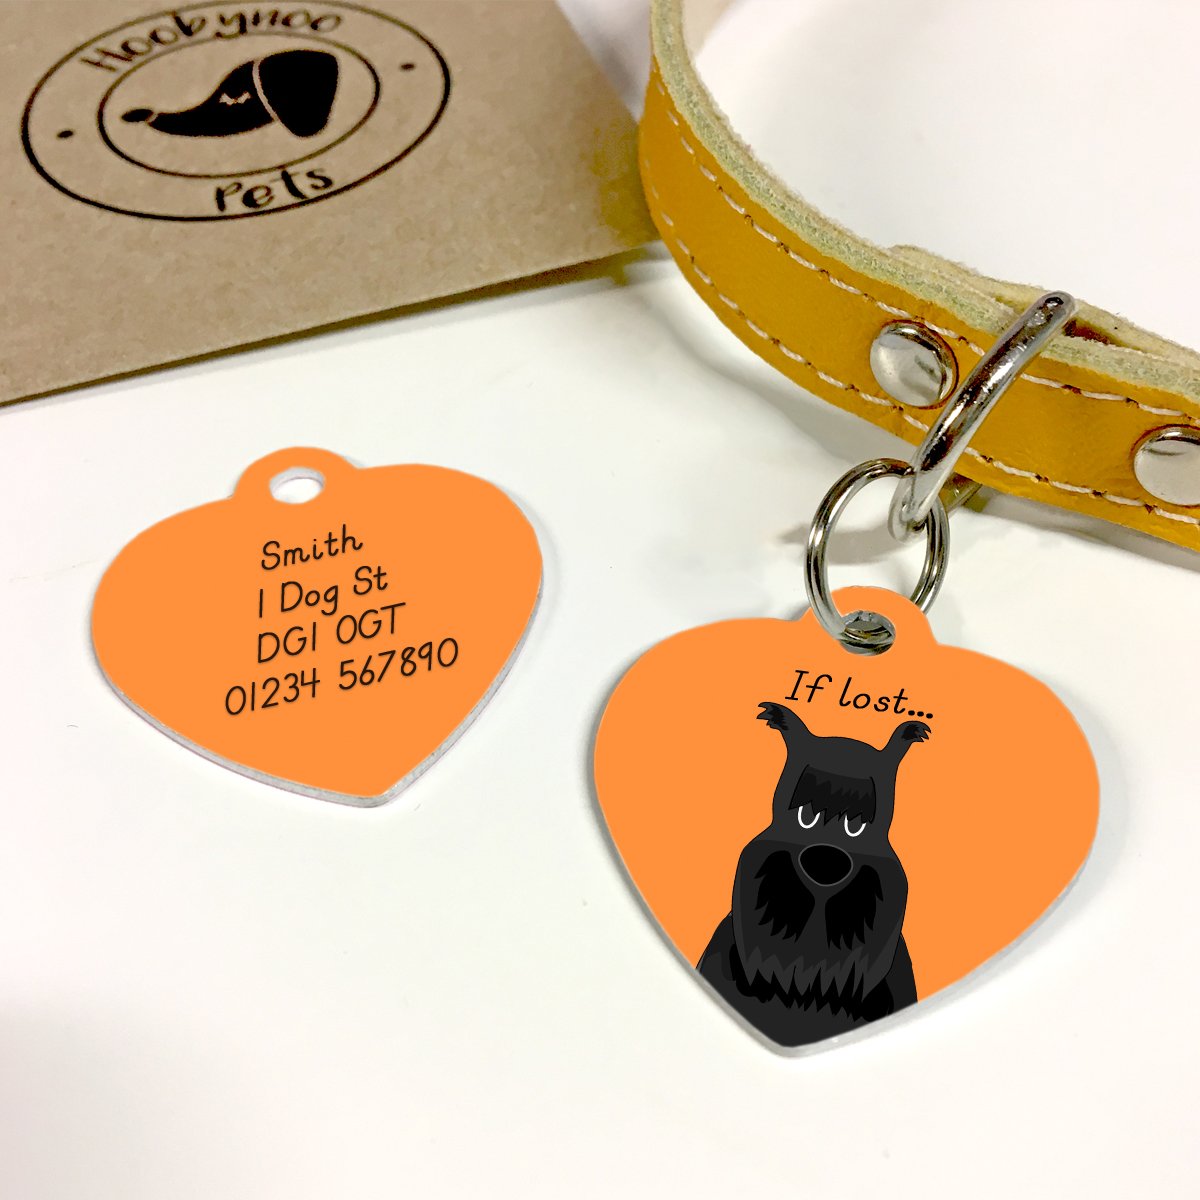 Introducing a new dog tag! The Scottish Terrier